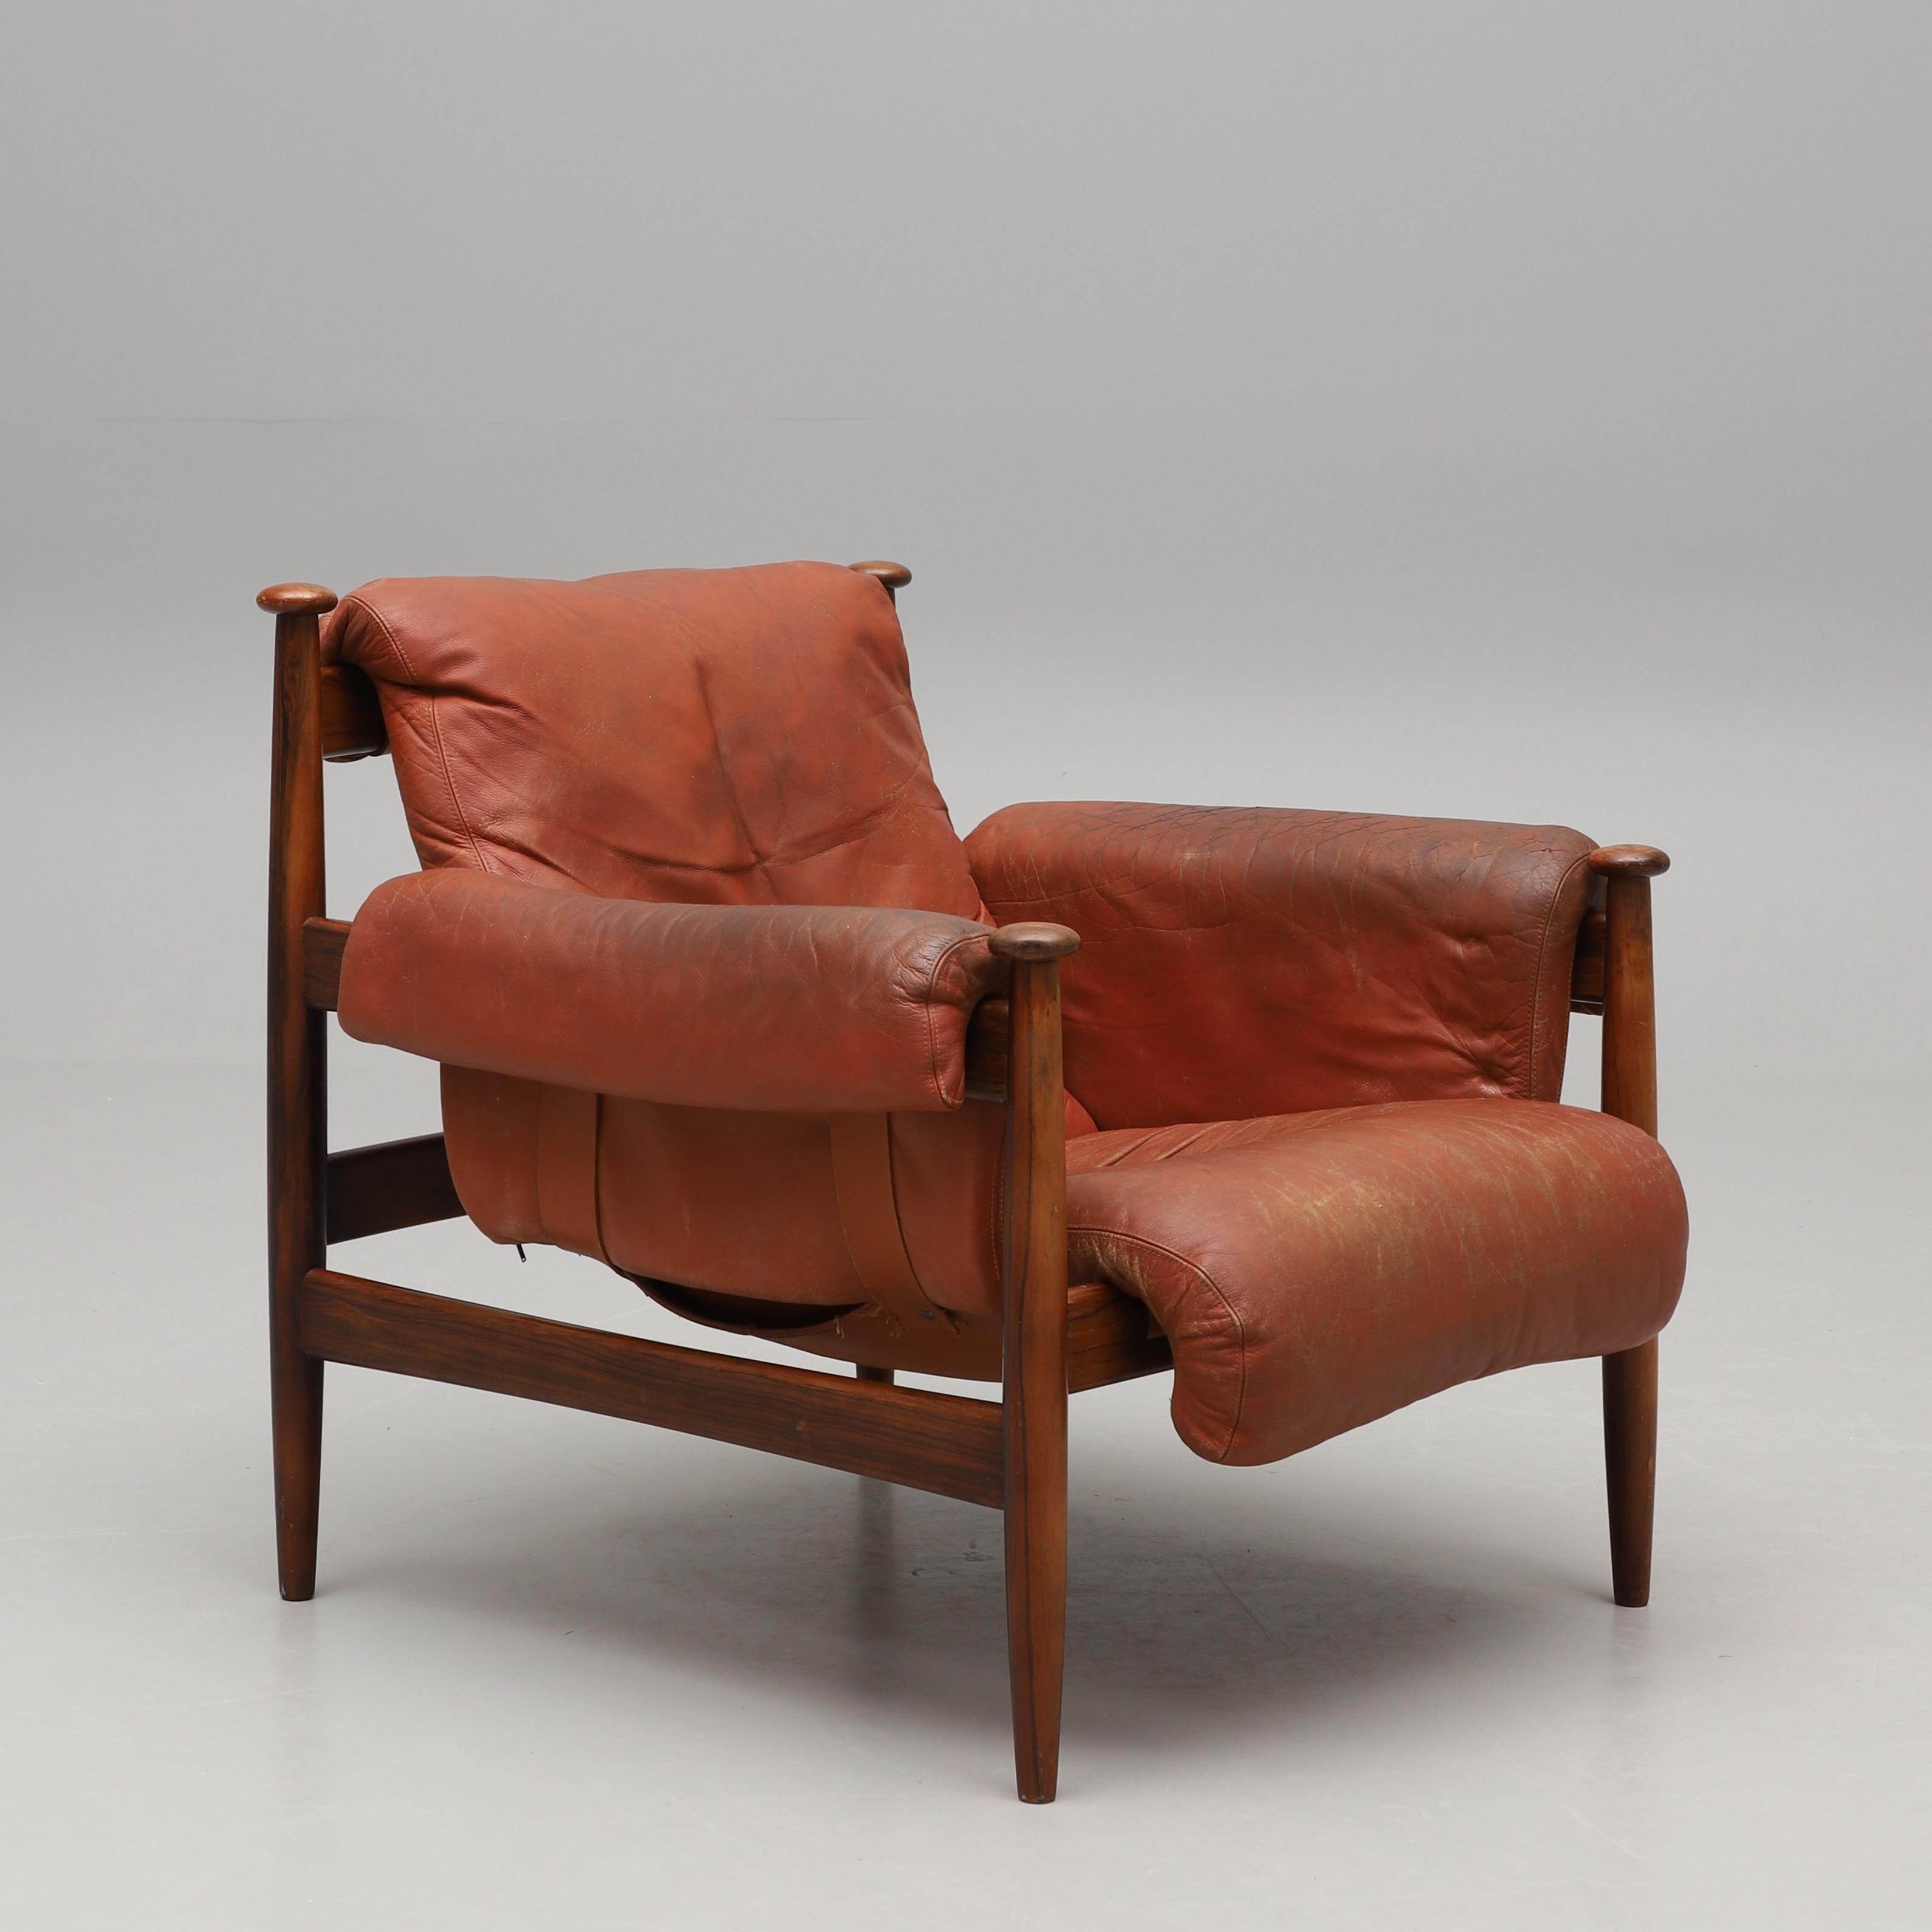 Armiral chair with its footstool designed by Eric Merthen for Ire Mobel Sweden in the 1960s. The chair has a beautiful rosewood frame and is upholstered in the original Cognac leather. The cushion is supported by leather straps with brass details.